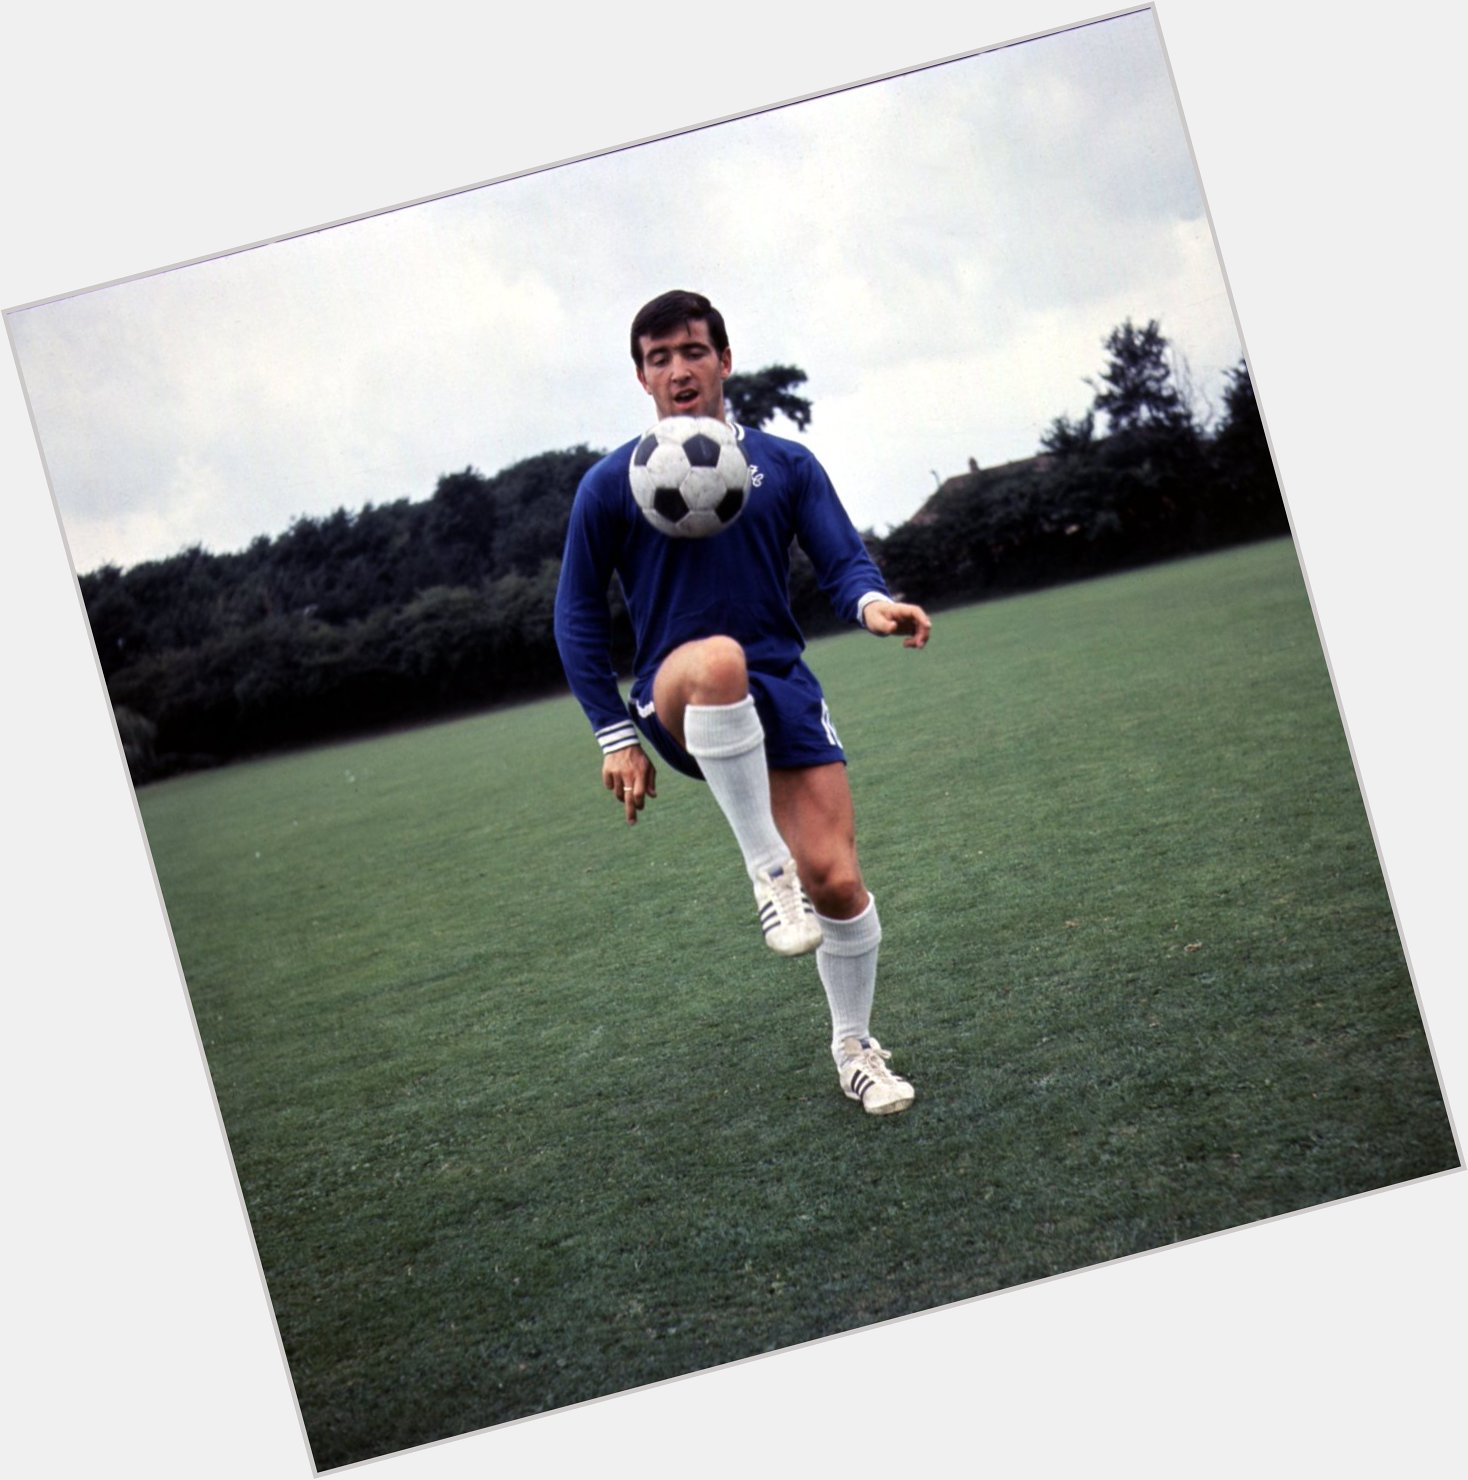  Wishing former Blue Terry Venables a very happy birthday! 

